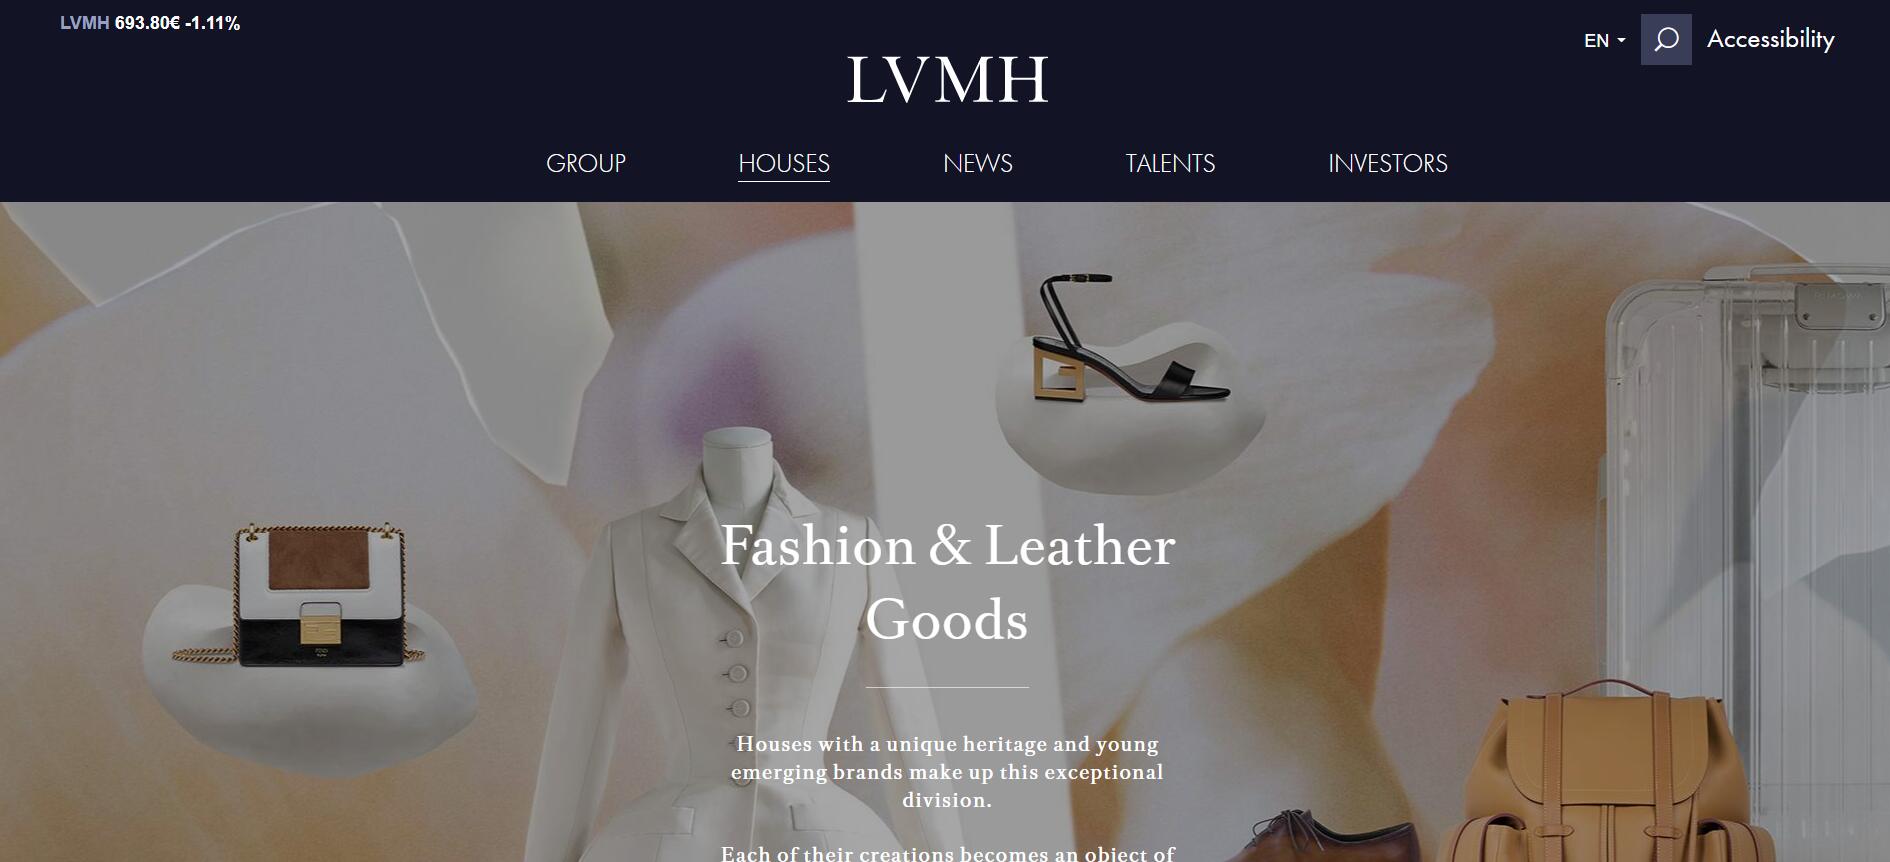 LVMH is to Build New Workshop Making Louis Vuitton Bags in Tuscany, Italy